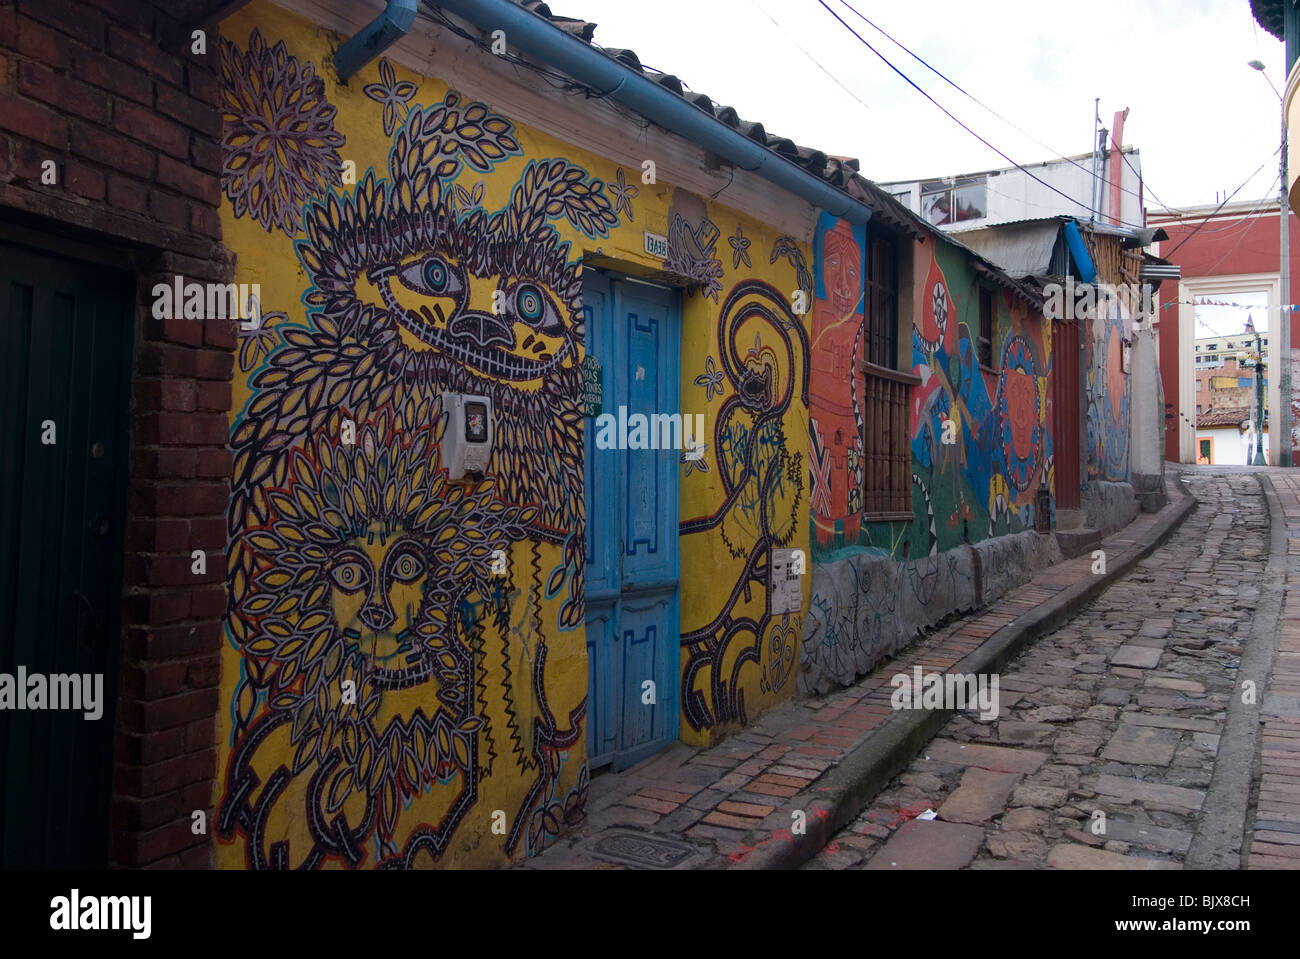 Wall paintings, Candelaria, old section of the city, Bogota, Colombia. Stock Photo